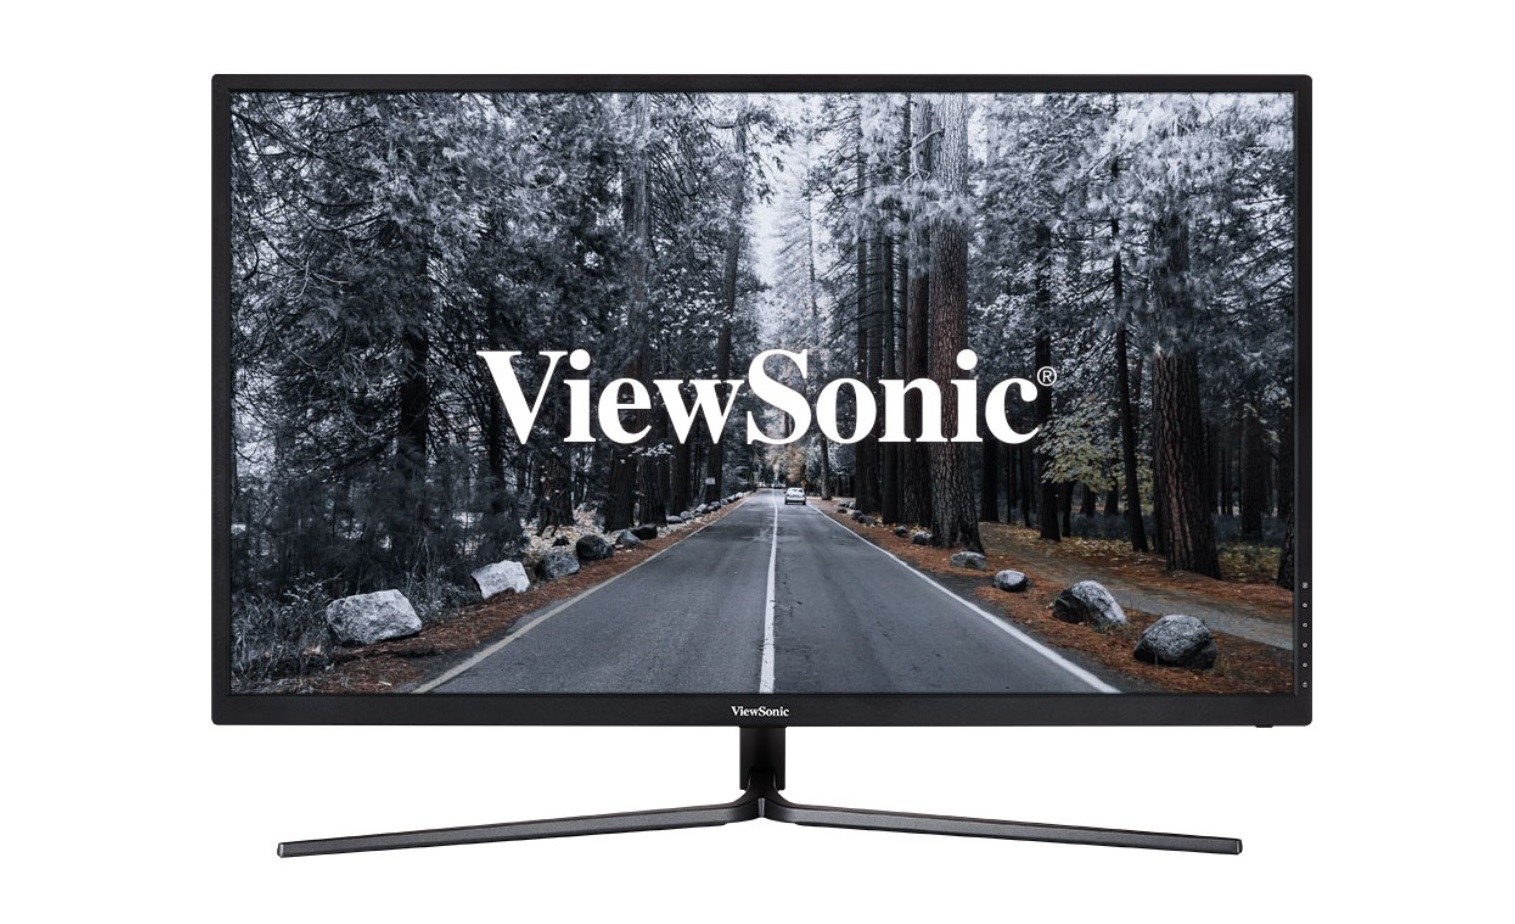 ViewSonic VX3211-4K-mhd LCD Monitor User Guide - Featured Image